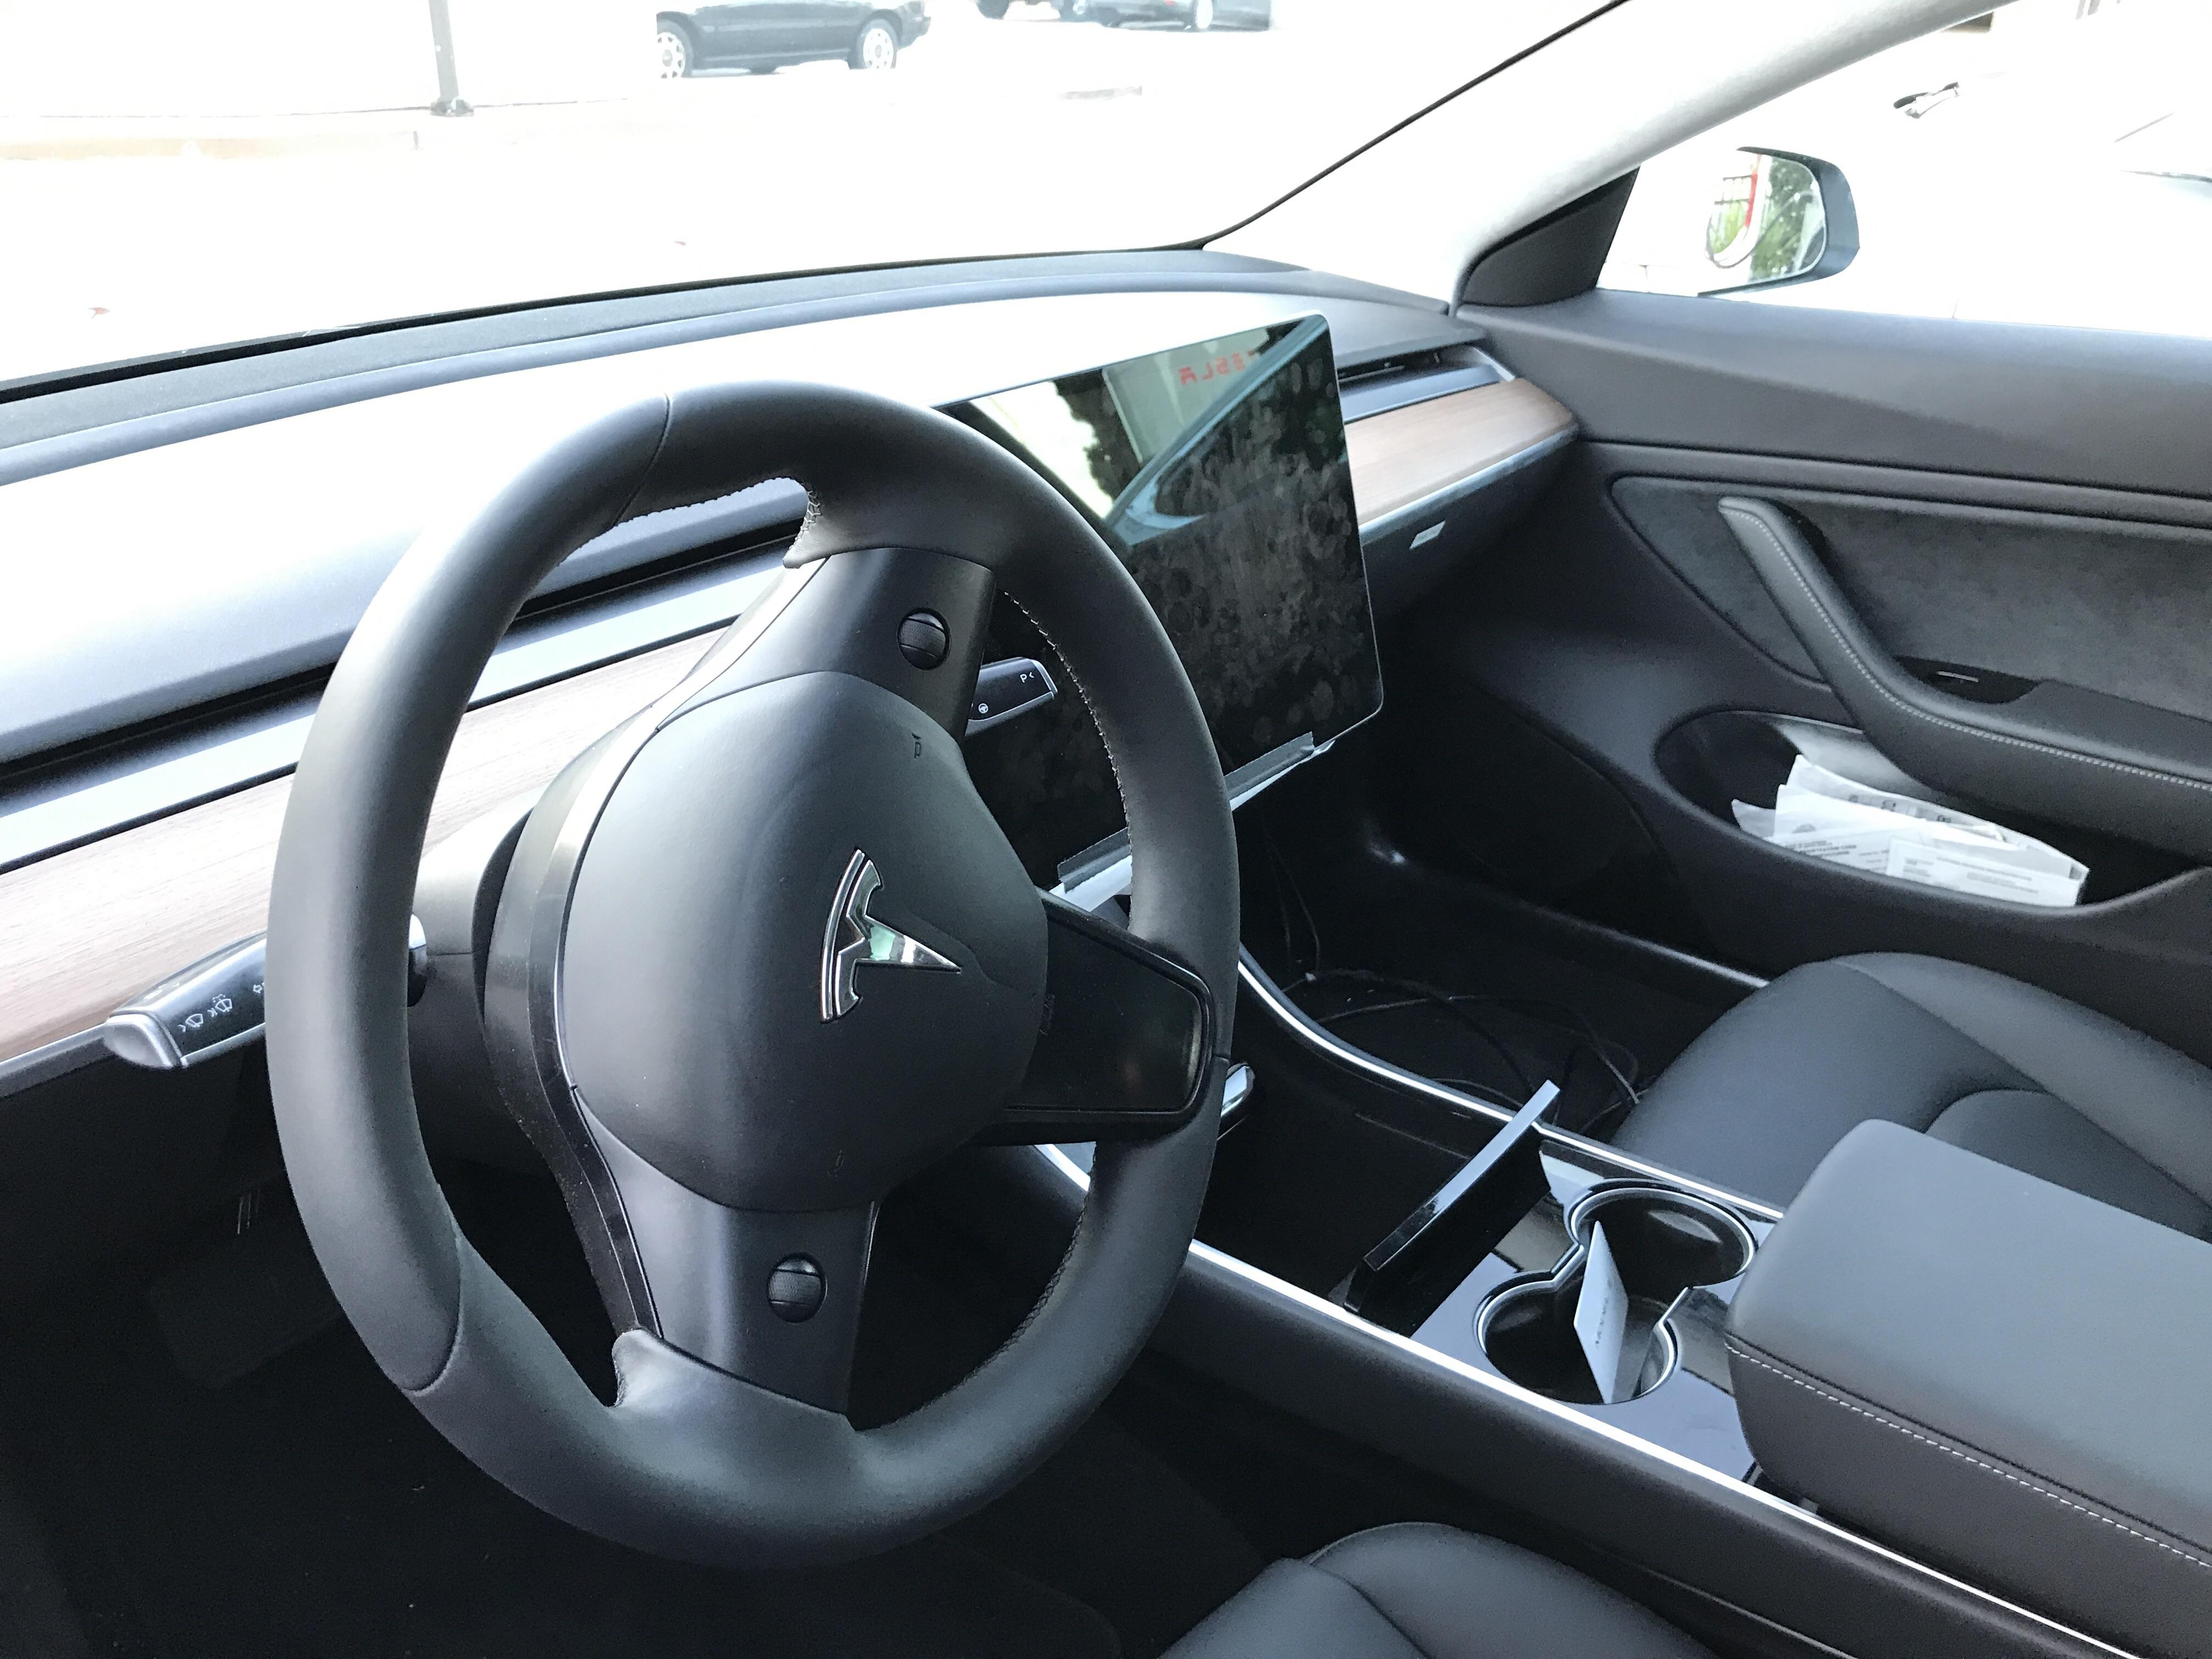 Brown cap Classify Tesla Model 3 design is "pretty much final," plus new insights from a batch  of high quality photos | Electrek